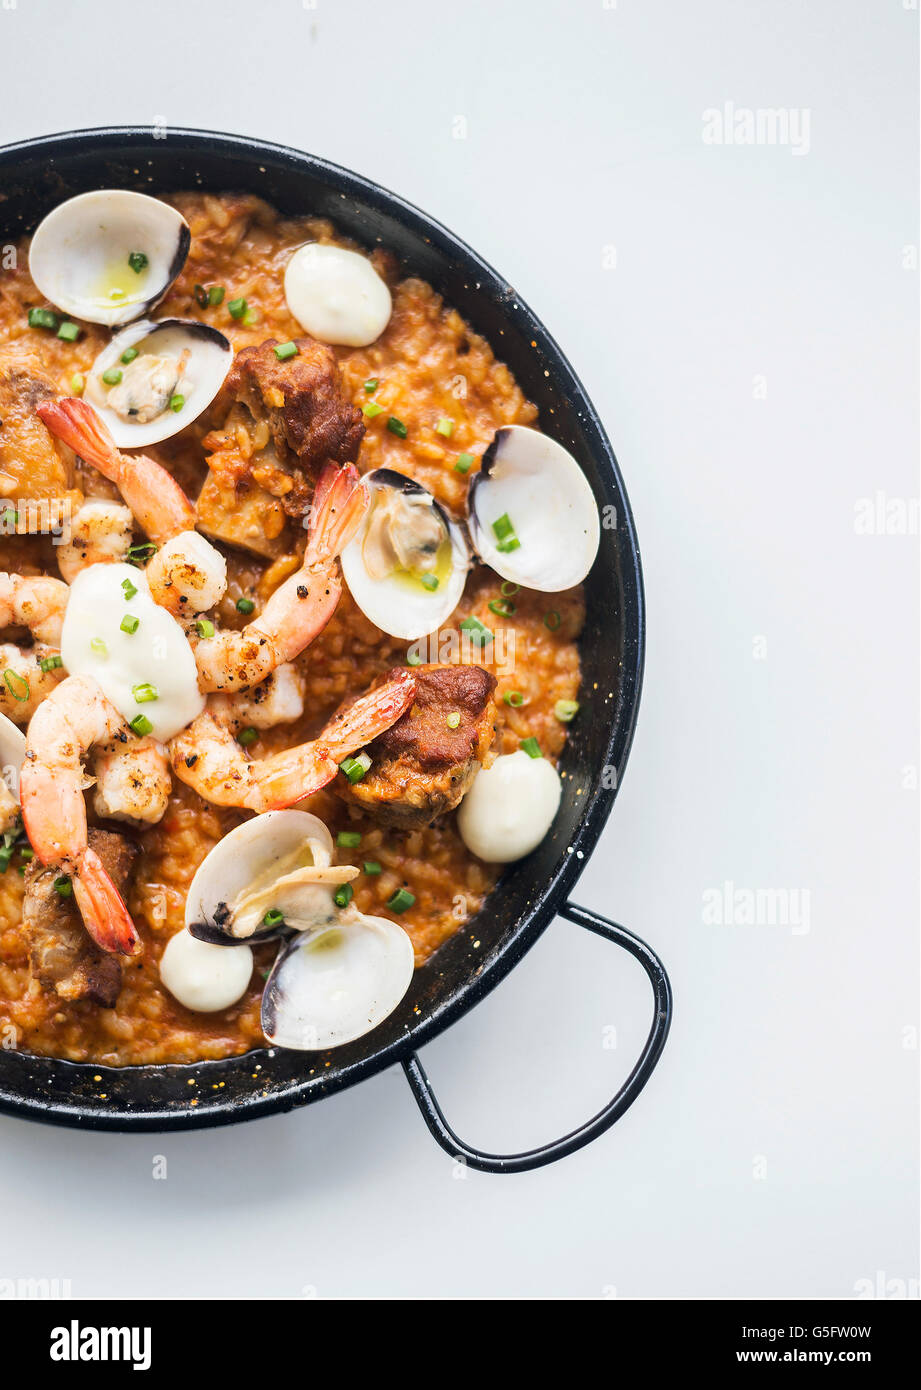 gourmet spanish seafood and rice paella risotto on white background Stock Photo